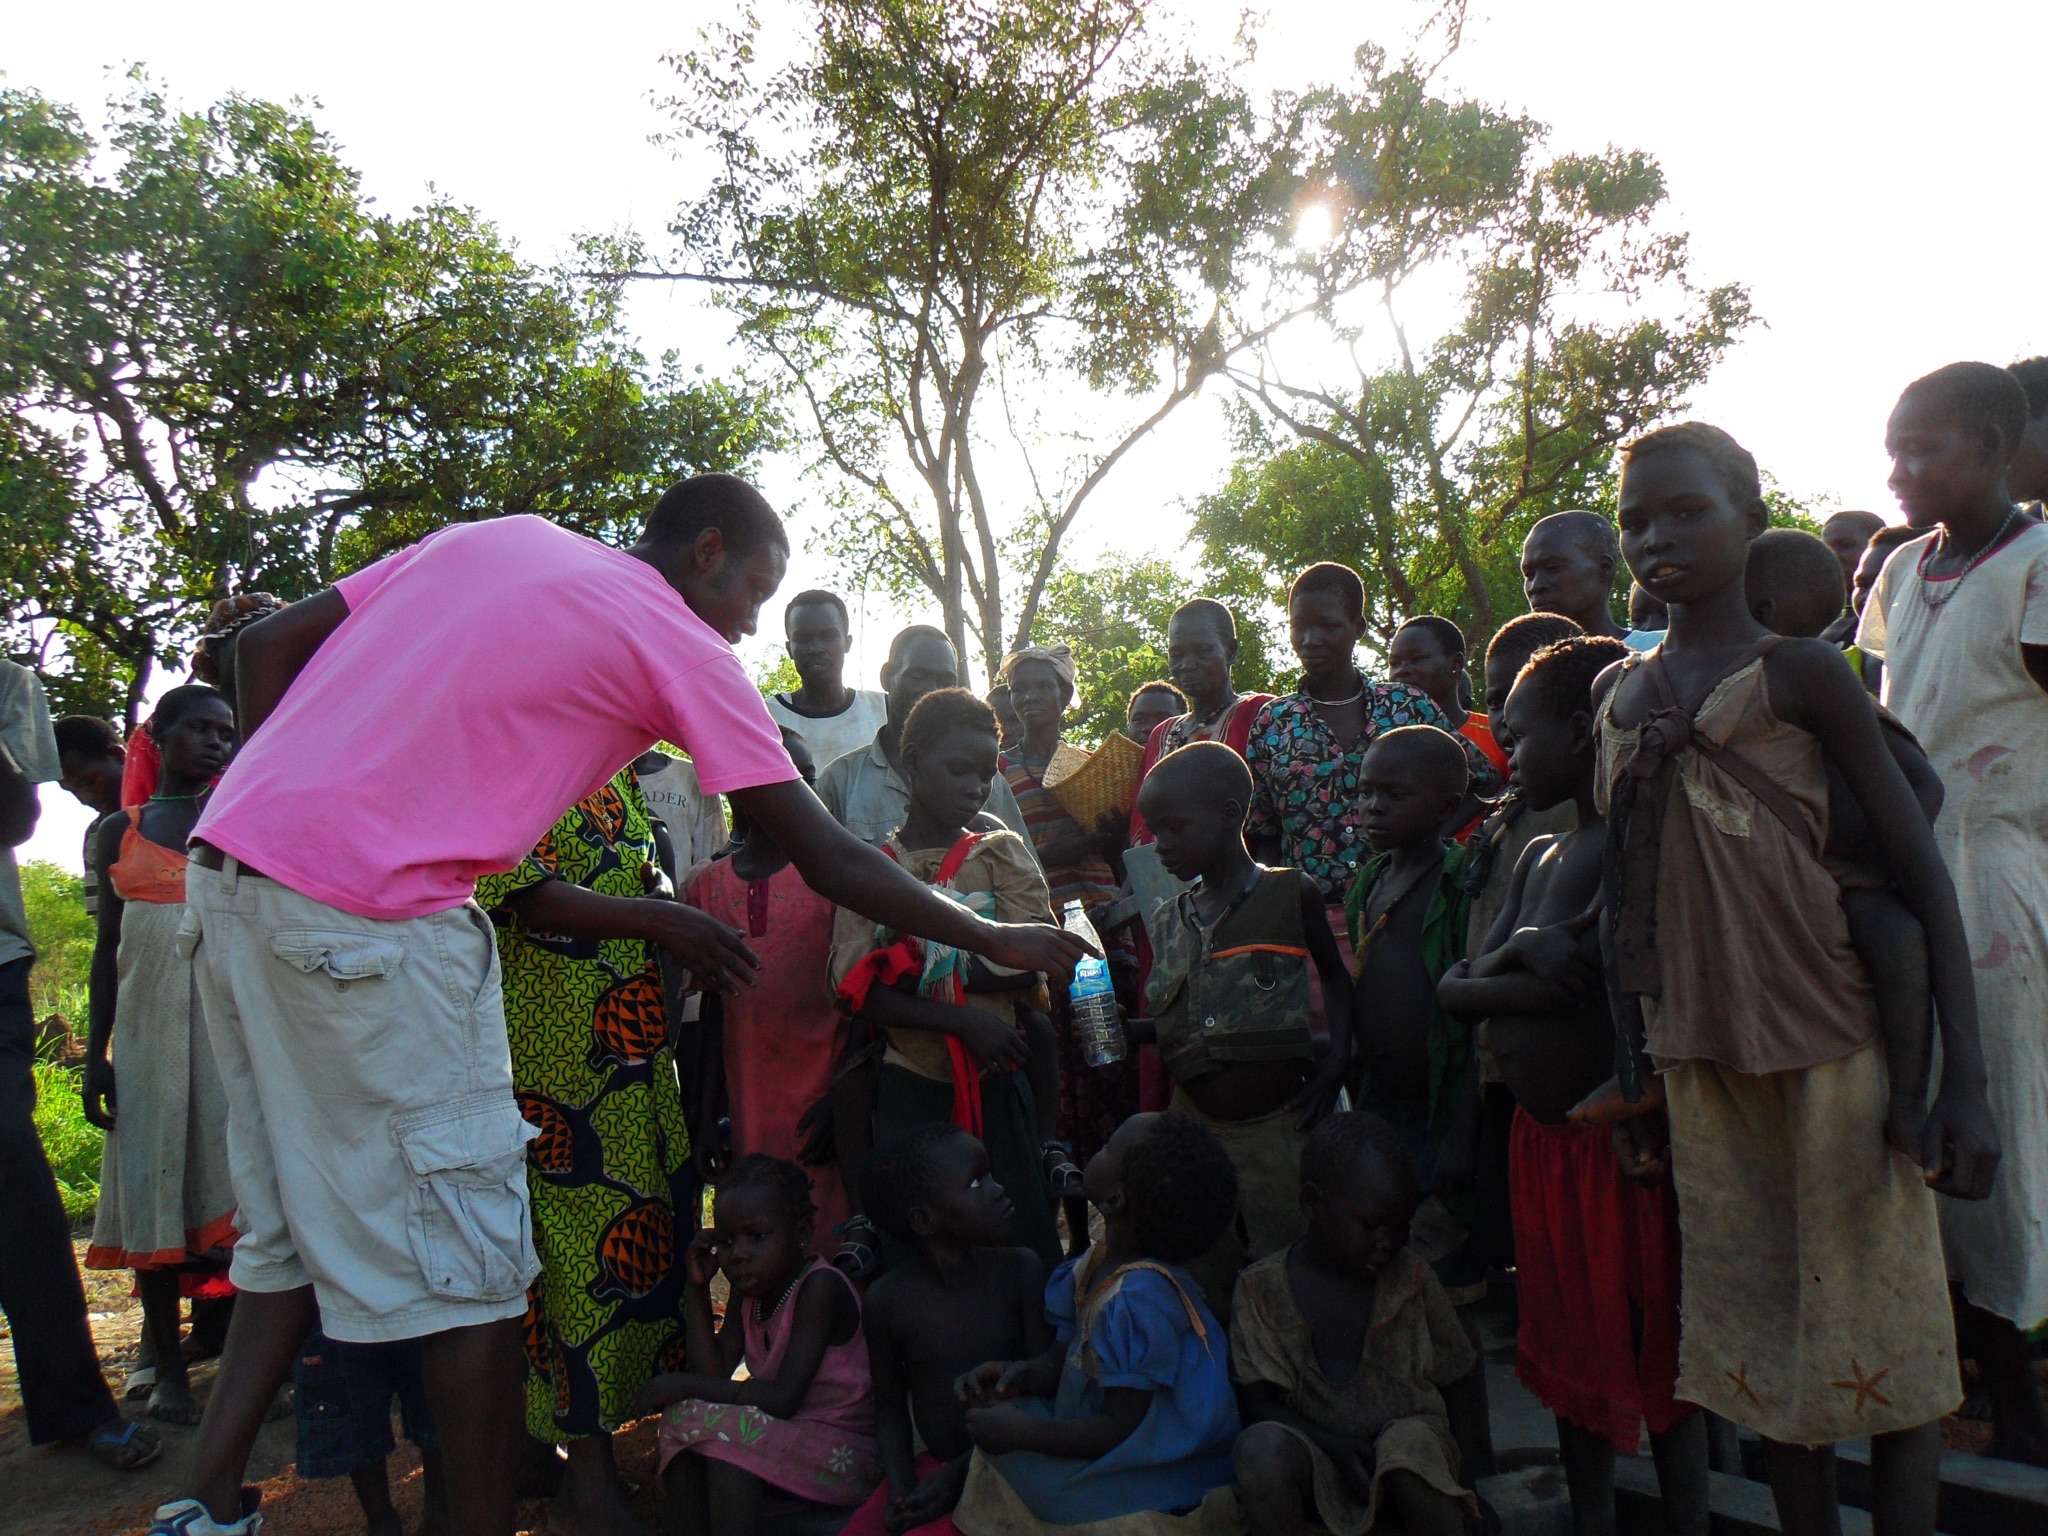   The Healing Kadi Foundation   providing sustainable health care to the people of South Sudan   Clean Treated Water  